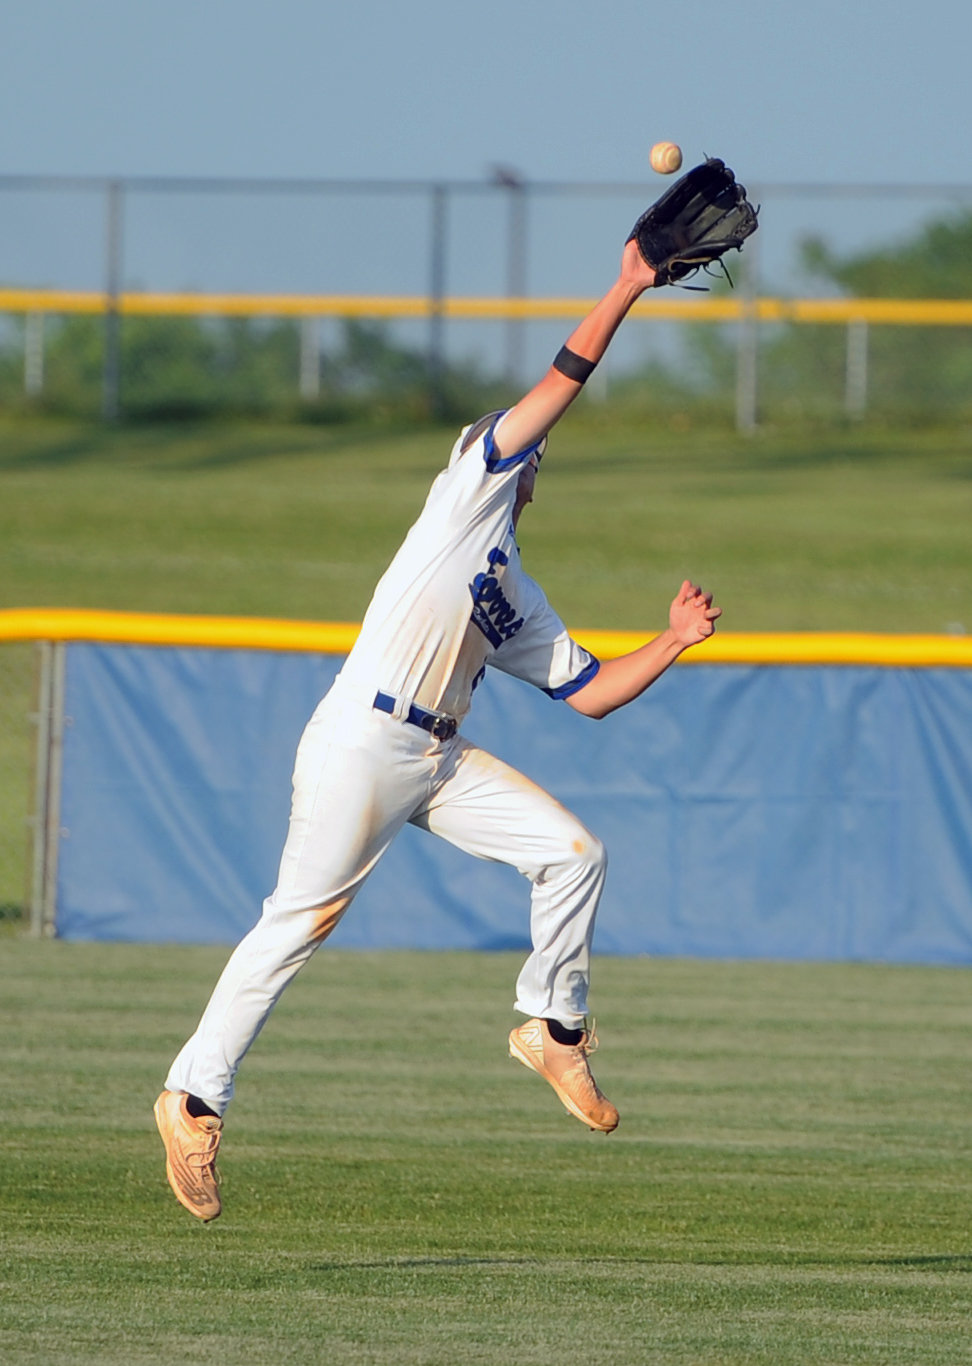 Brennan Mealer makes an acrobatic catch in right field.